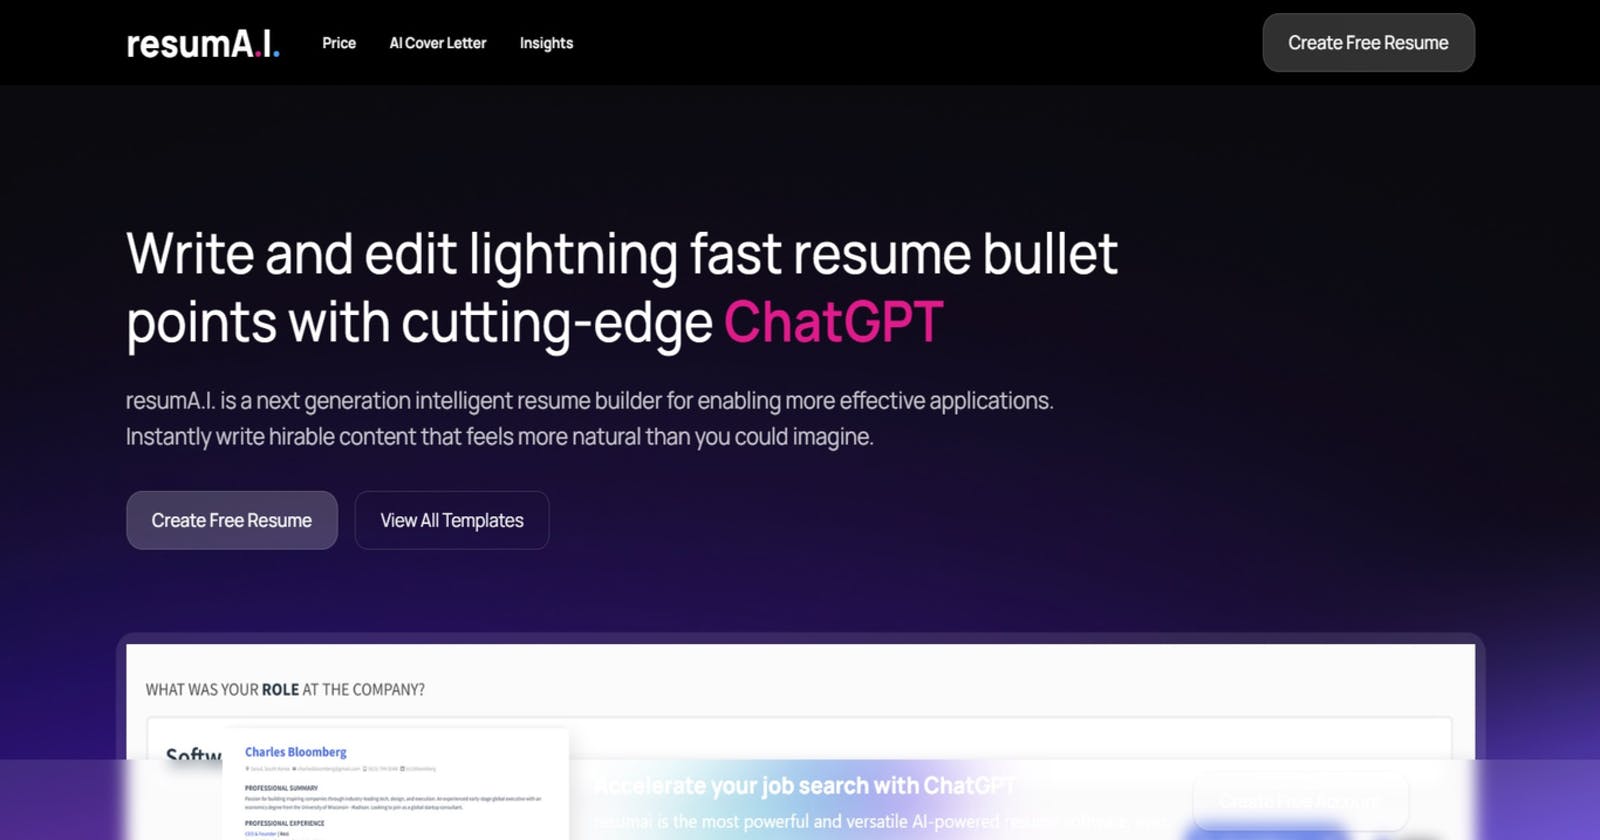 Introducing resumA.I.: Elevate Your Resume with Lightning-Fast Bullet Points